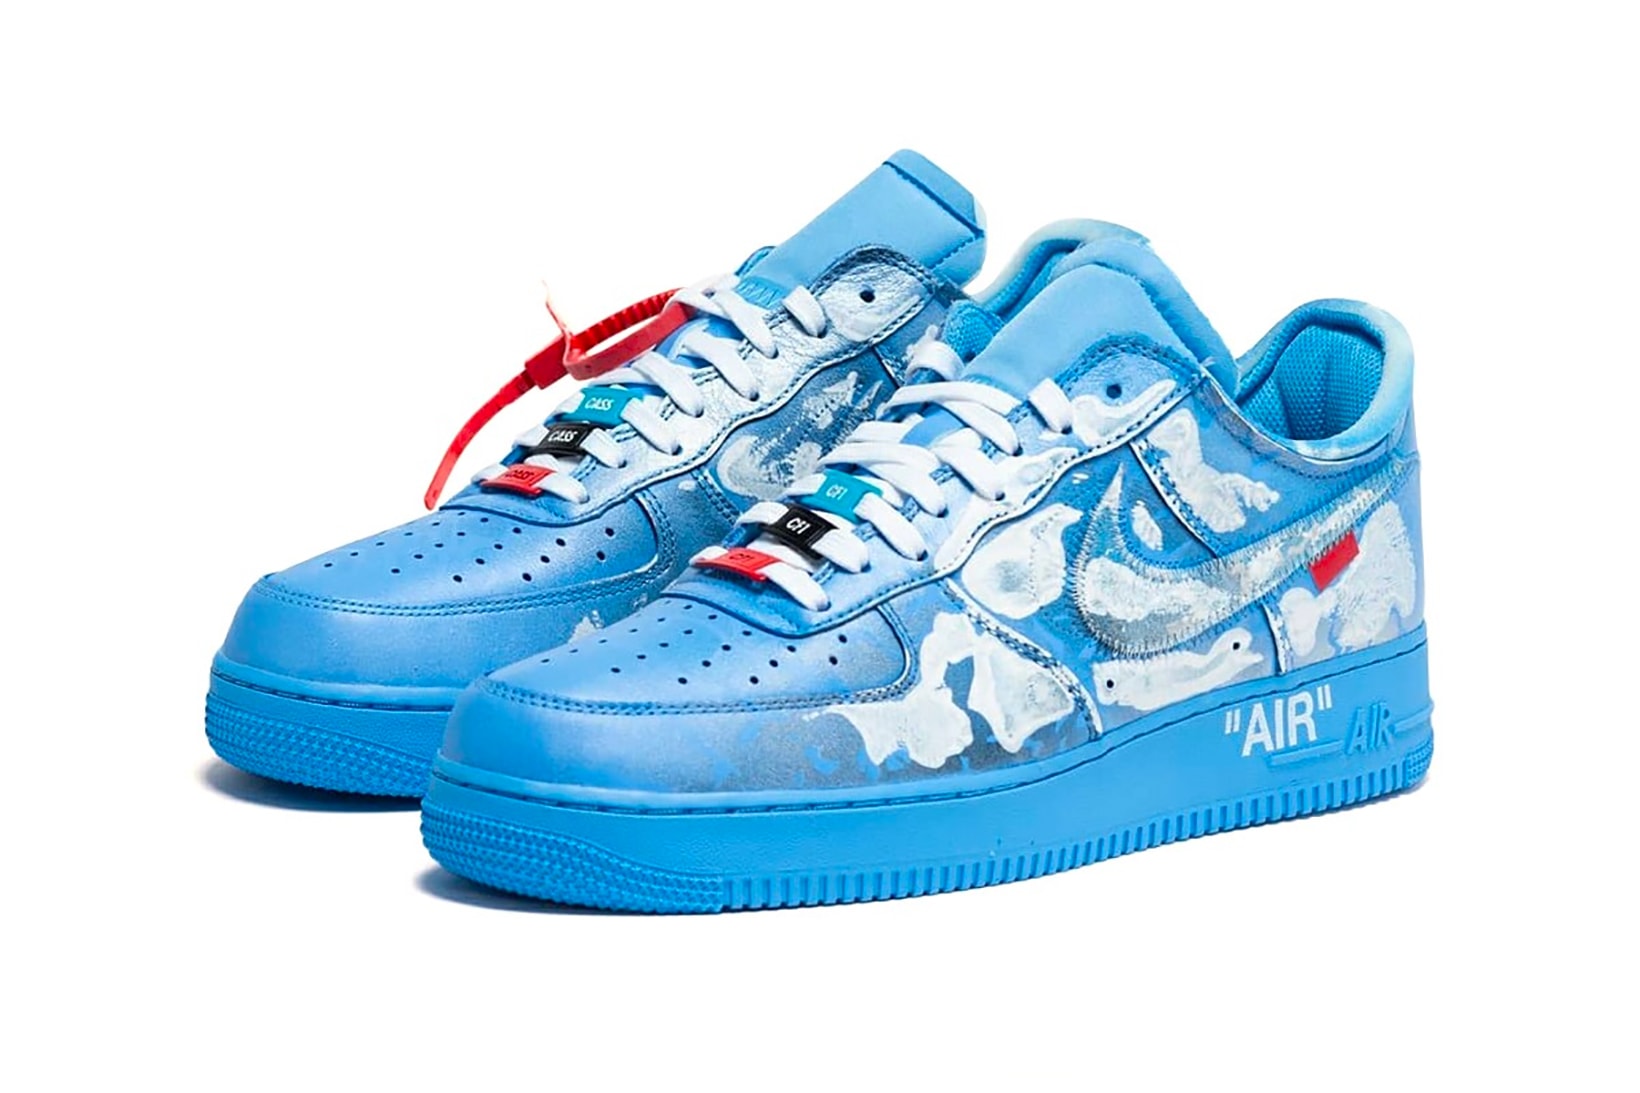 virgil abloh mca chicago cassius hirst nike air force 1 07 sneakers collaboration blue release footwear shoes sneakerhead